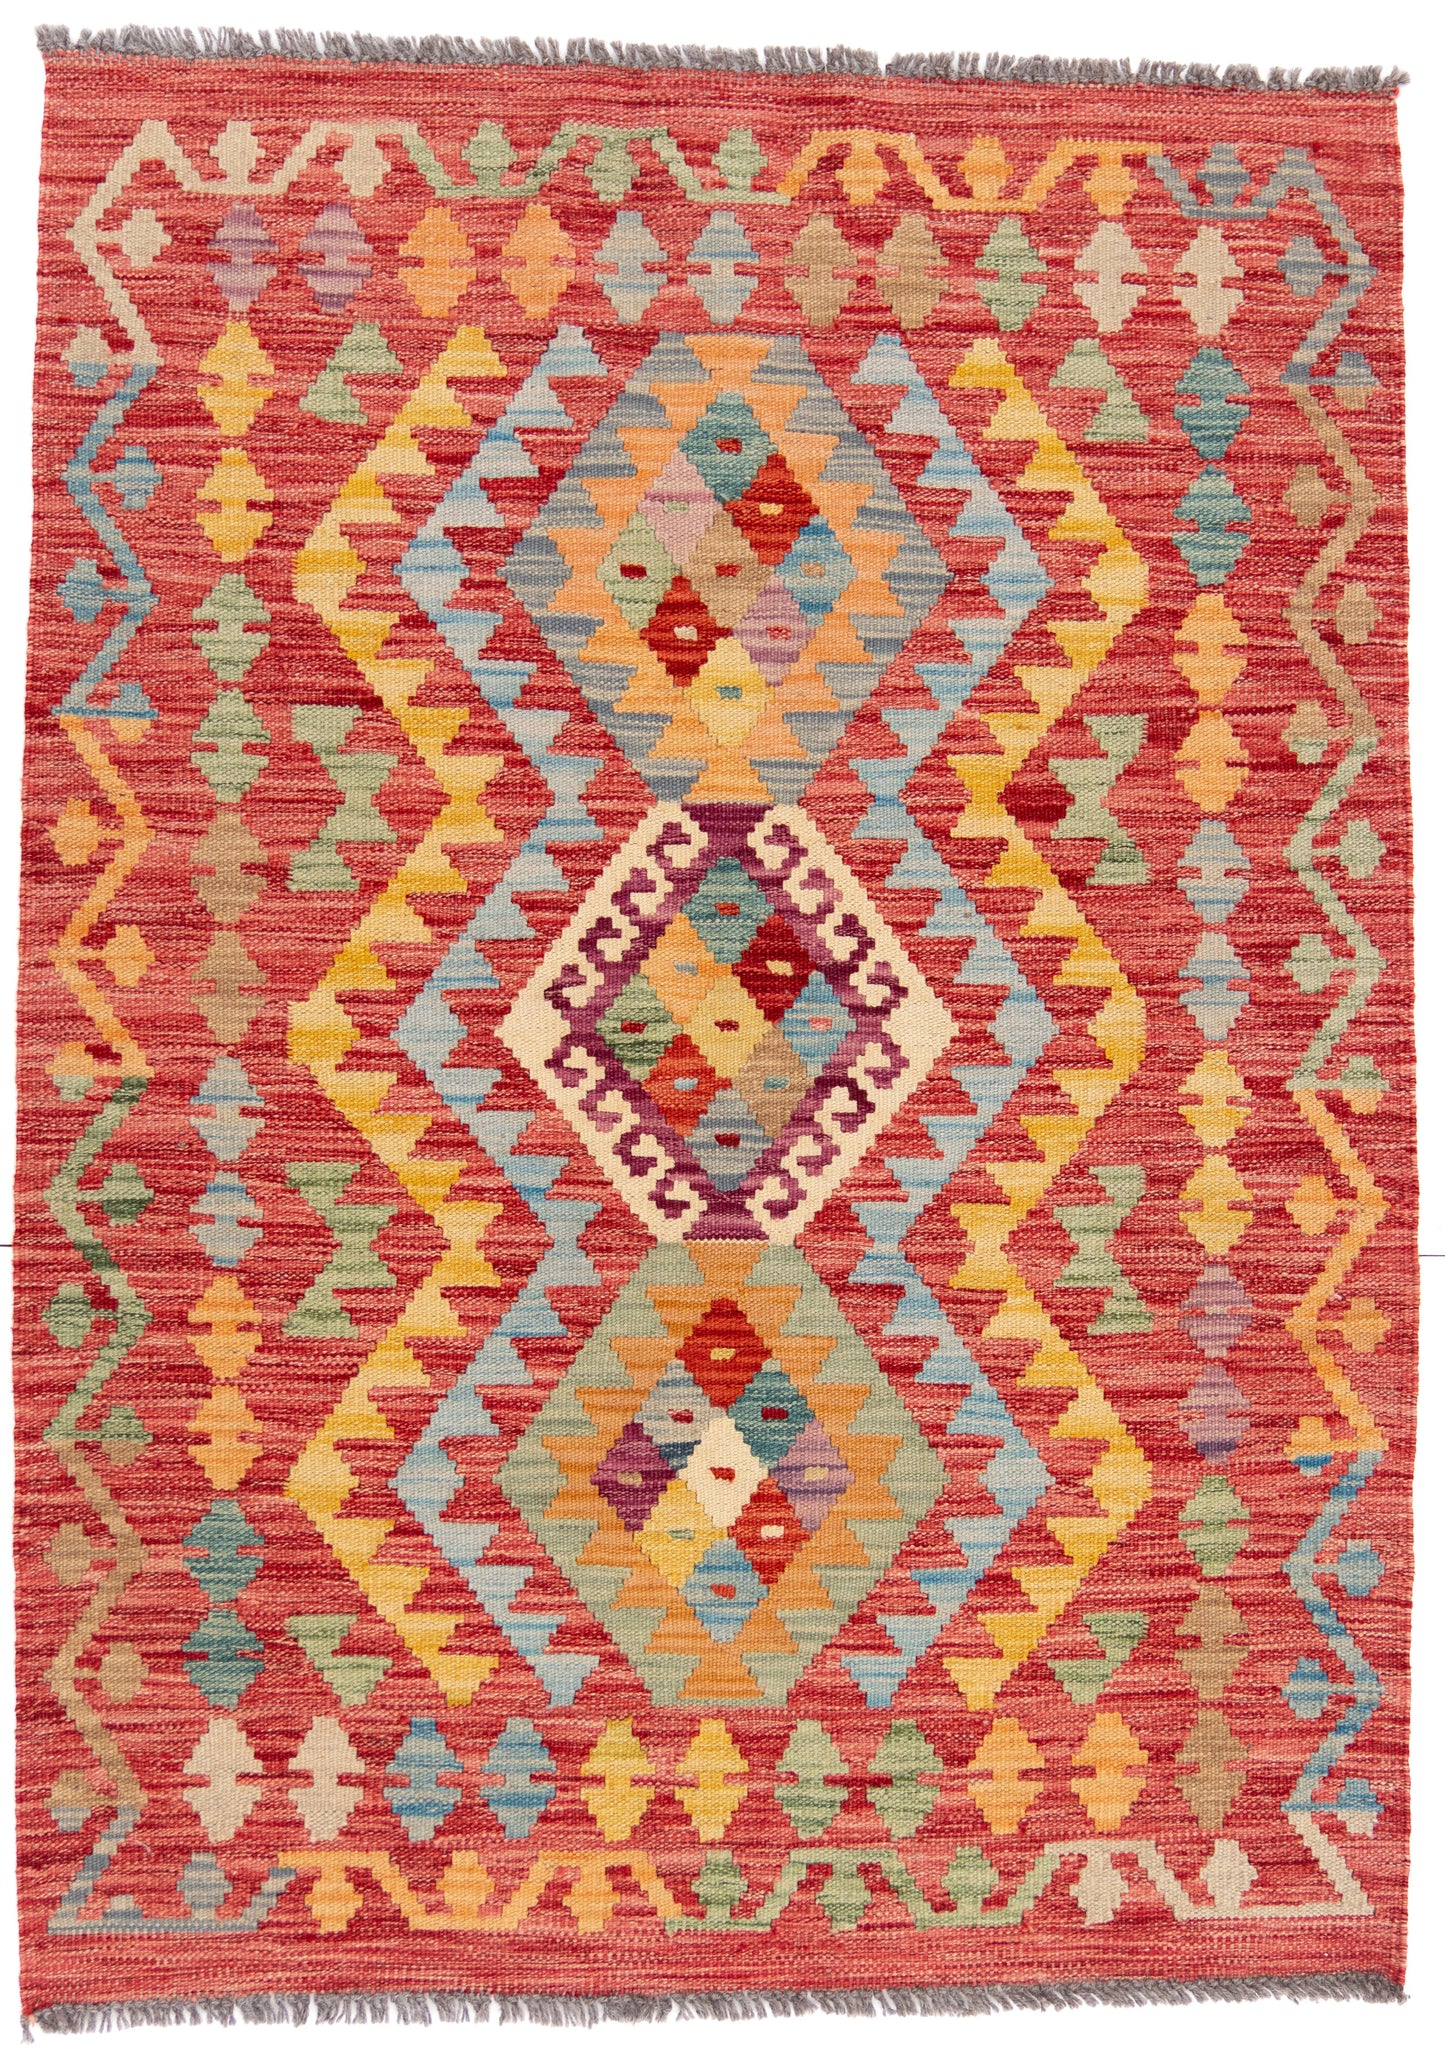 Multicoloured Red Kilim Carpet with Bright Geometric Shapes